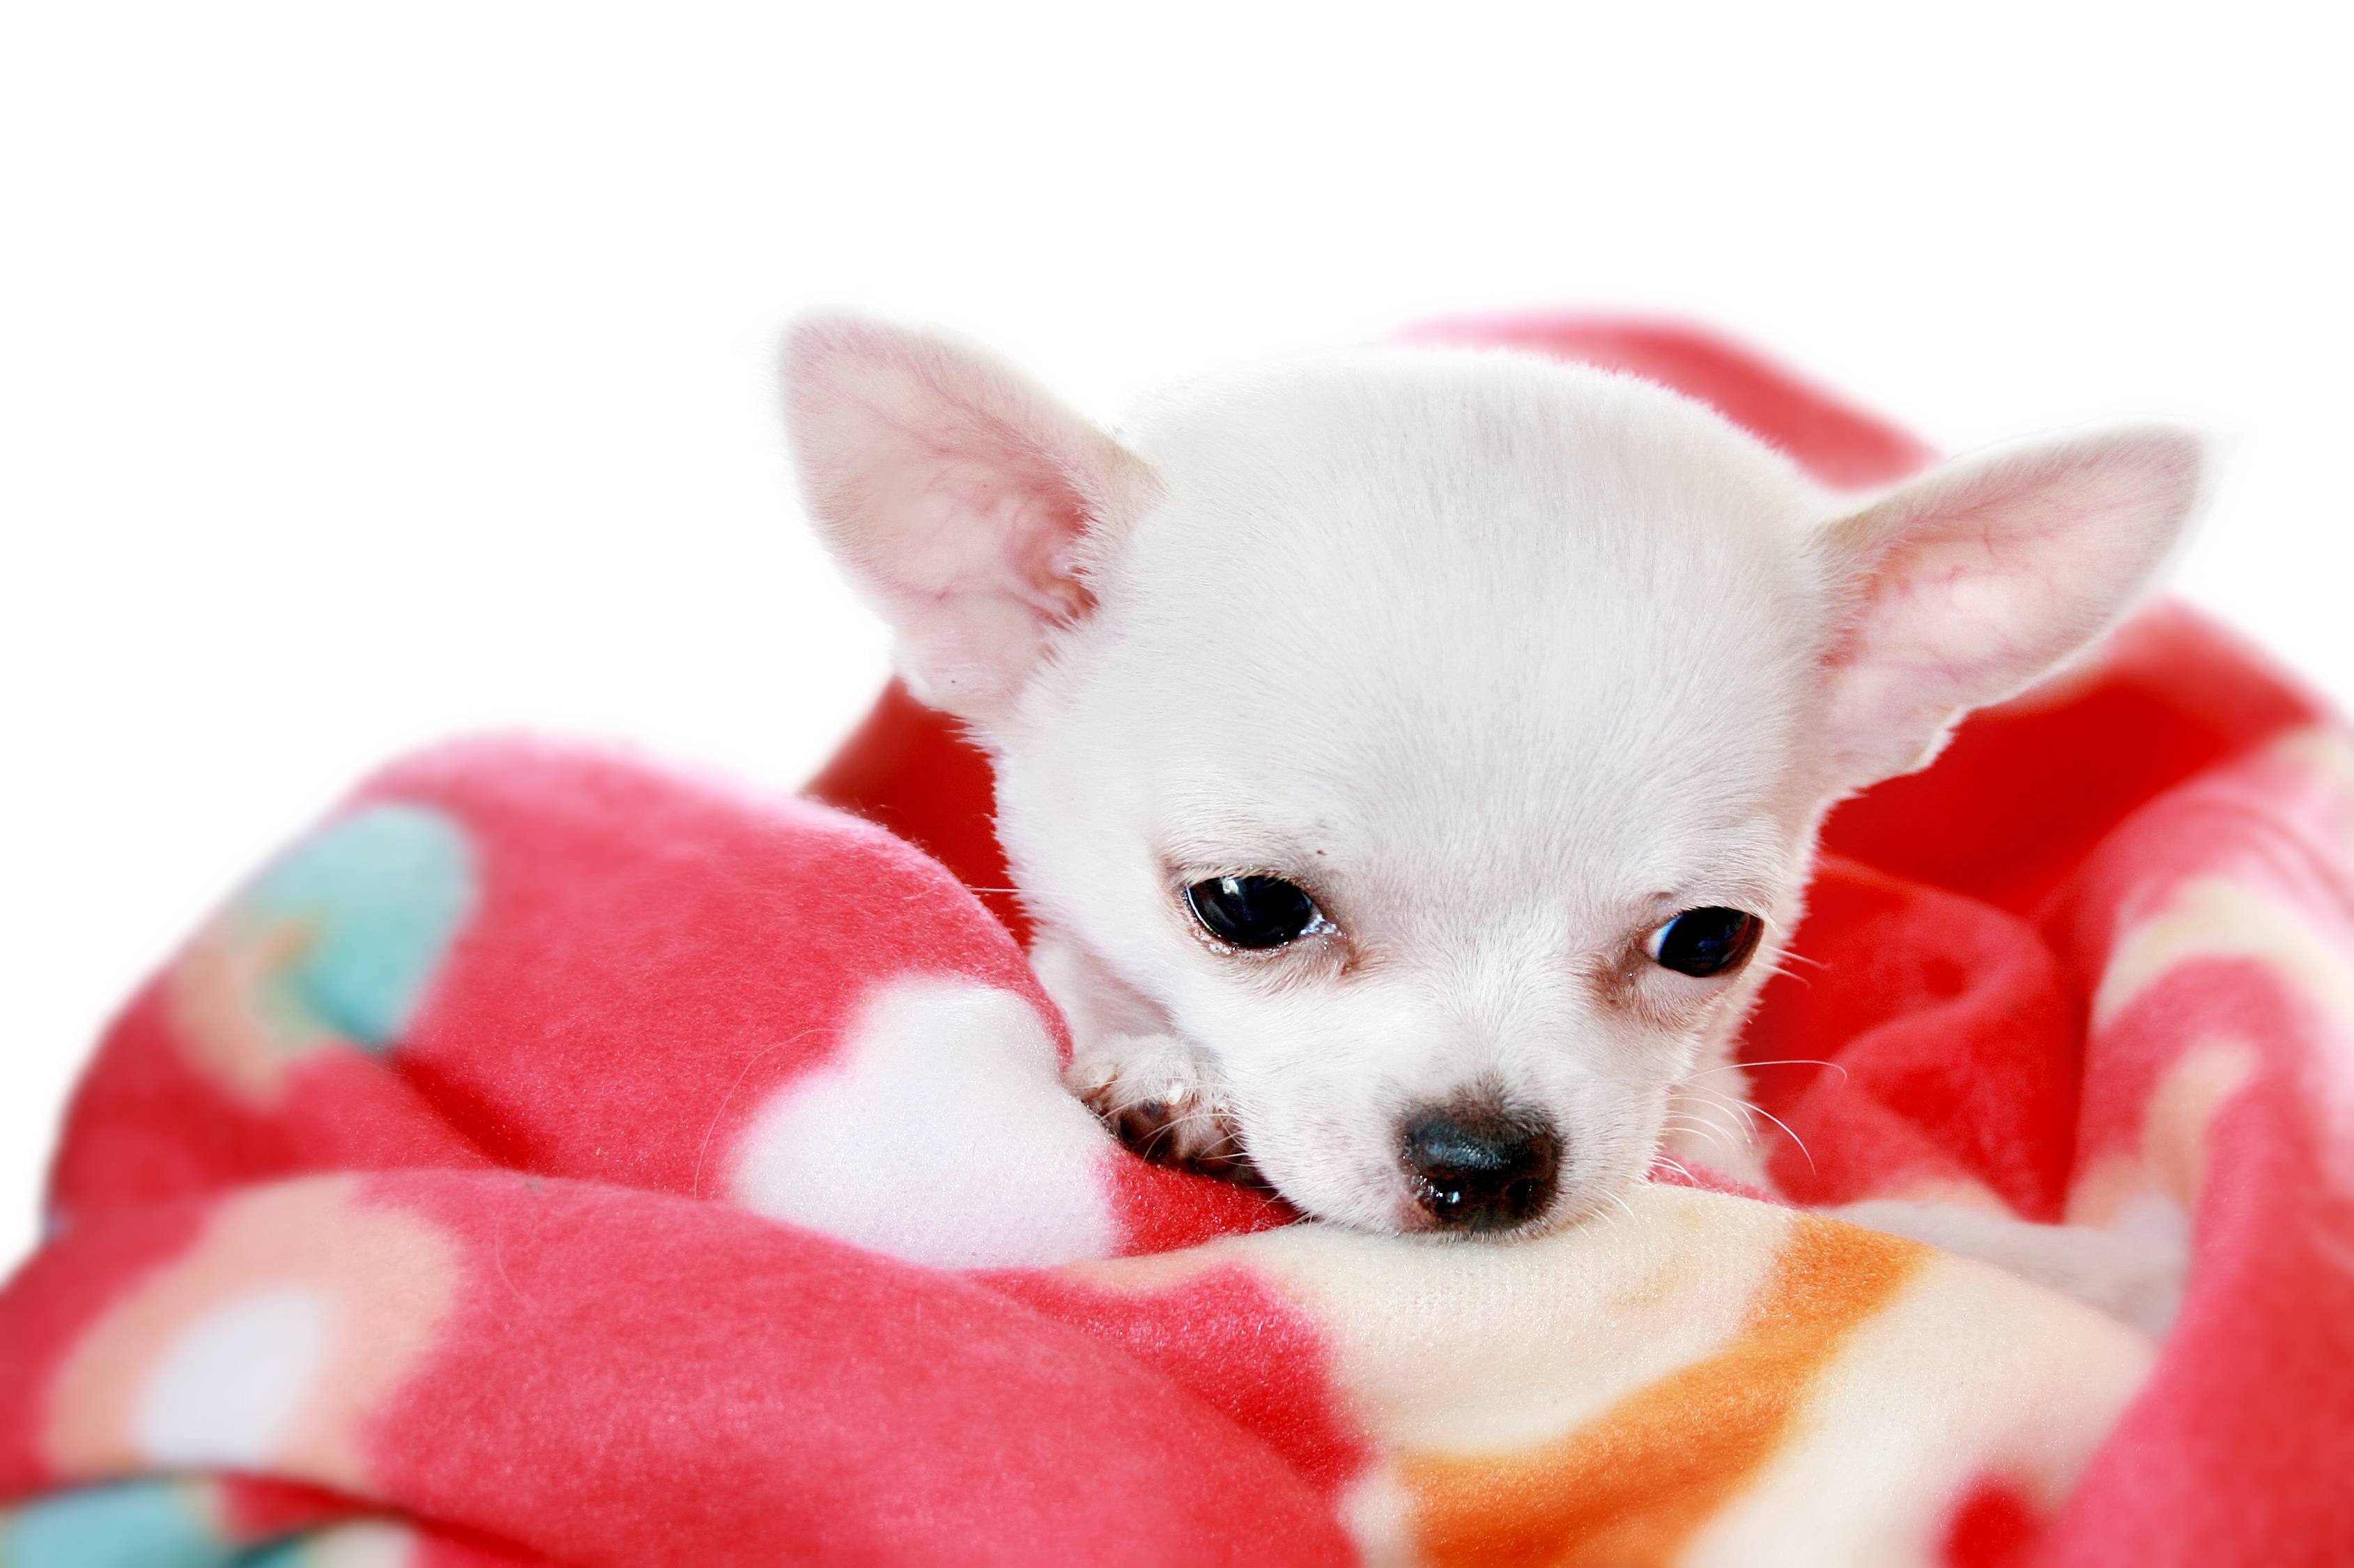 Adorable Little White Chihuahua This Sweet One Is Wrapped In